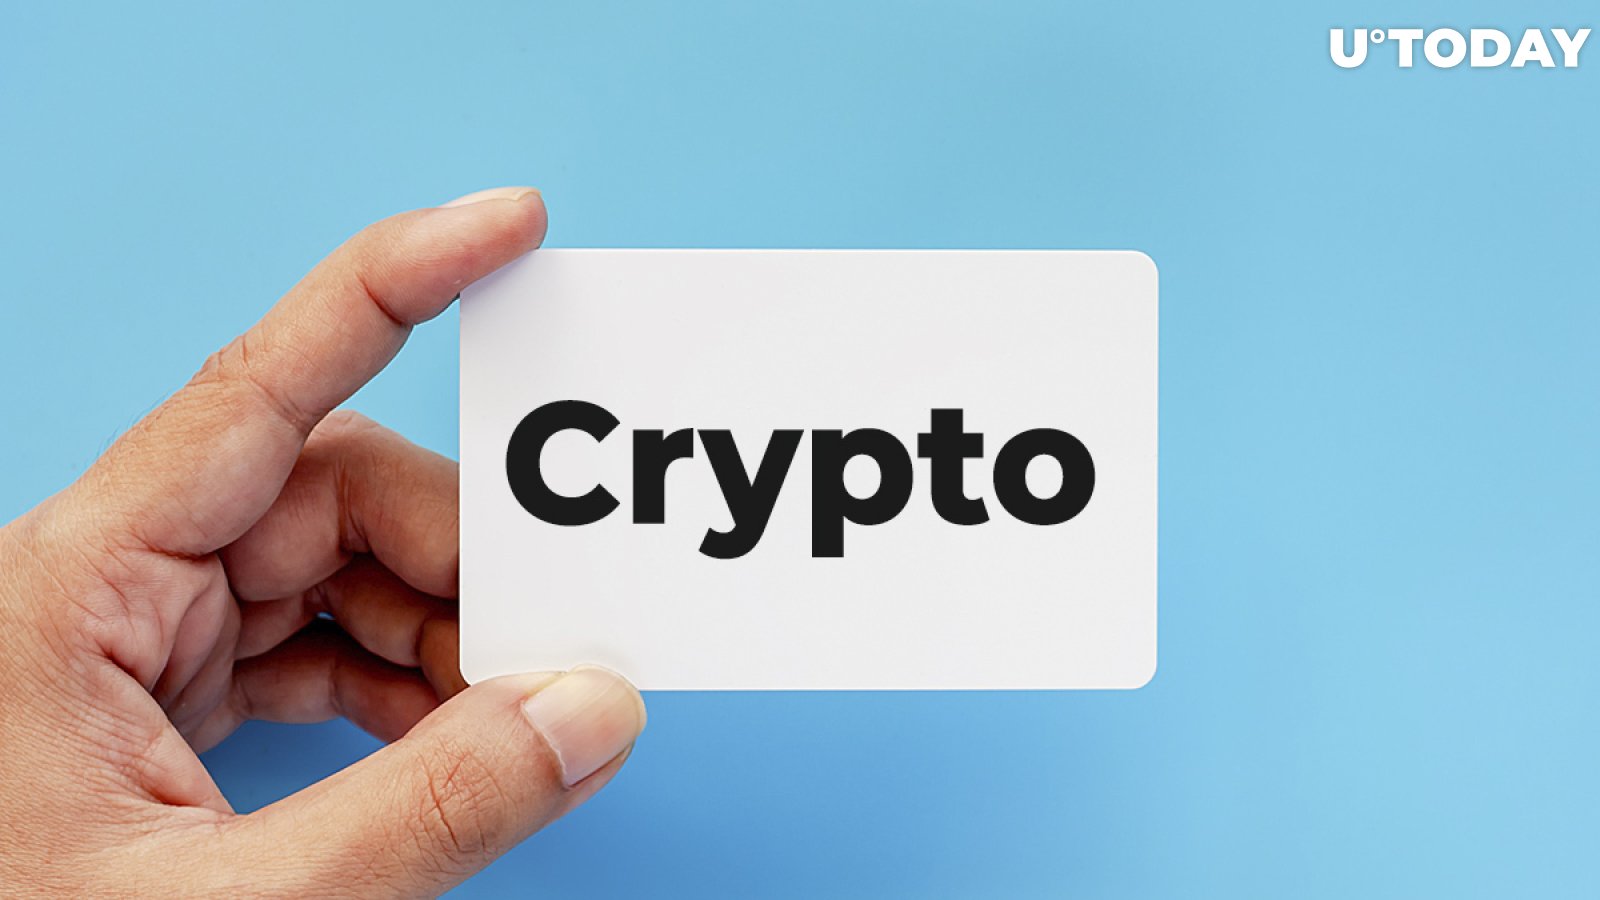 Buy Vouchers and Gift Cards with Crypto in 2020: BuySellVouchers.com Experience